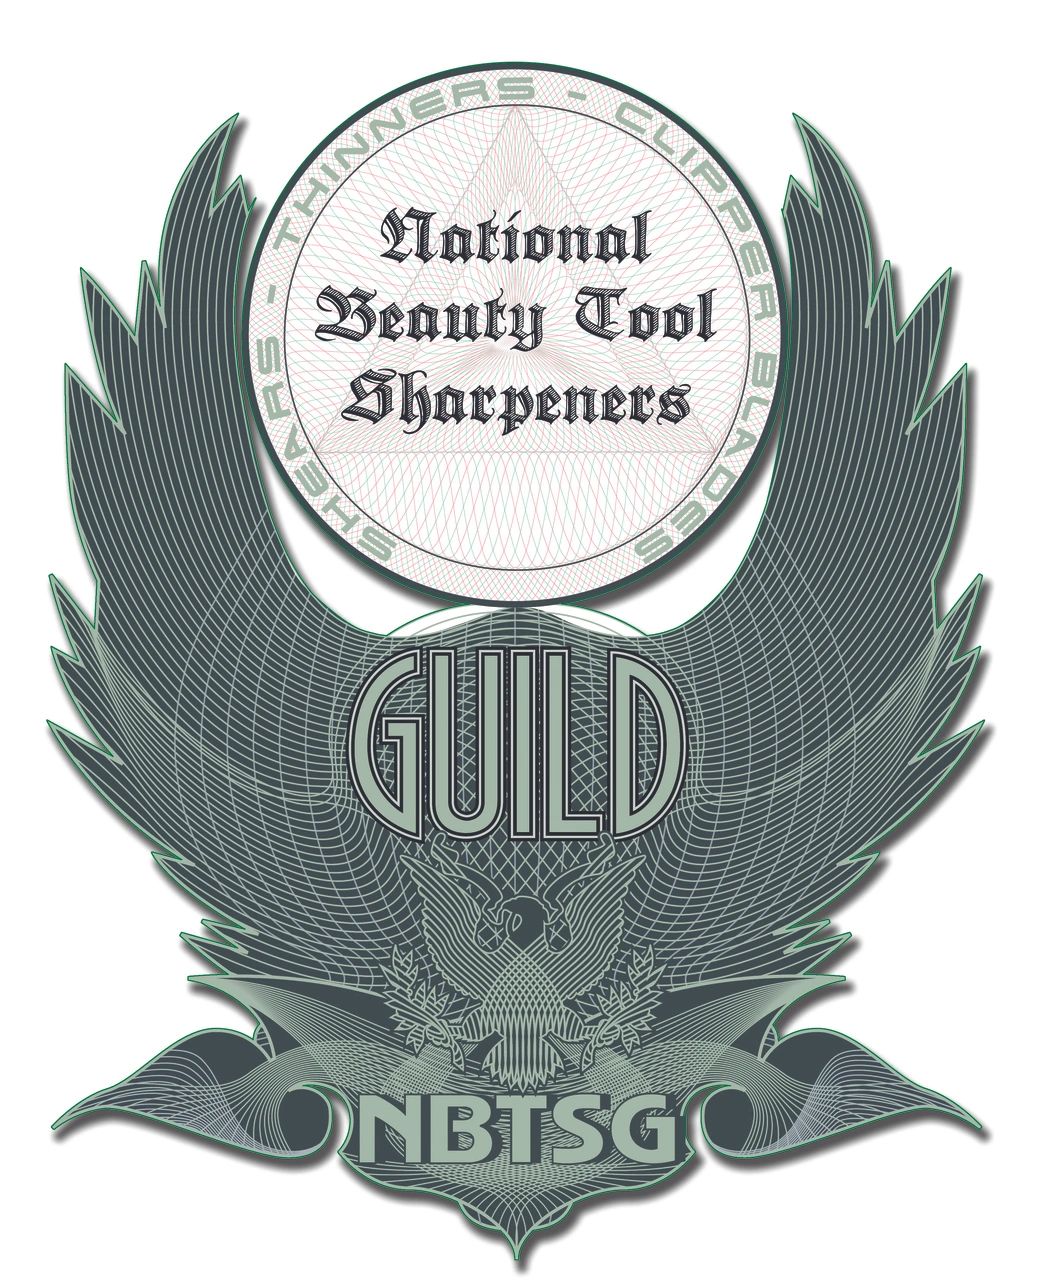 NBTSG is the National Beauty Tool Sharpeners Guild for Certified Sharpeners. Shears, Clipper Blades.